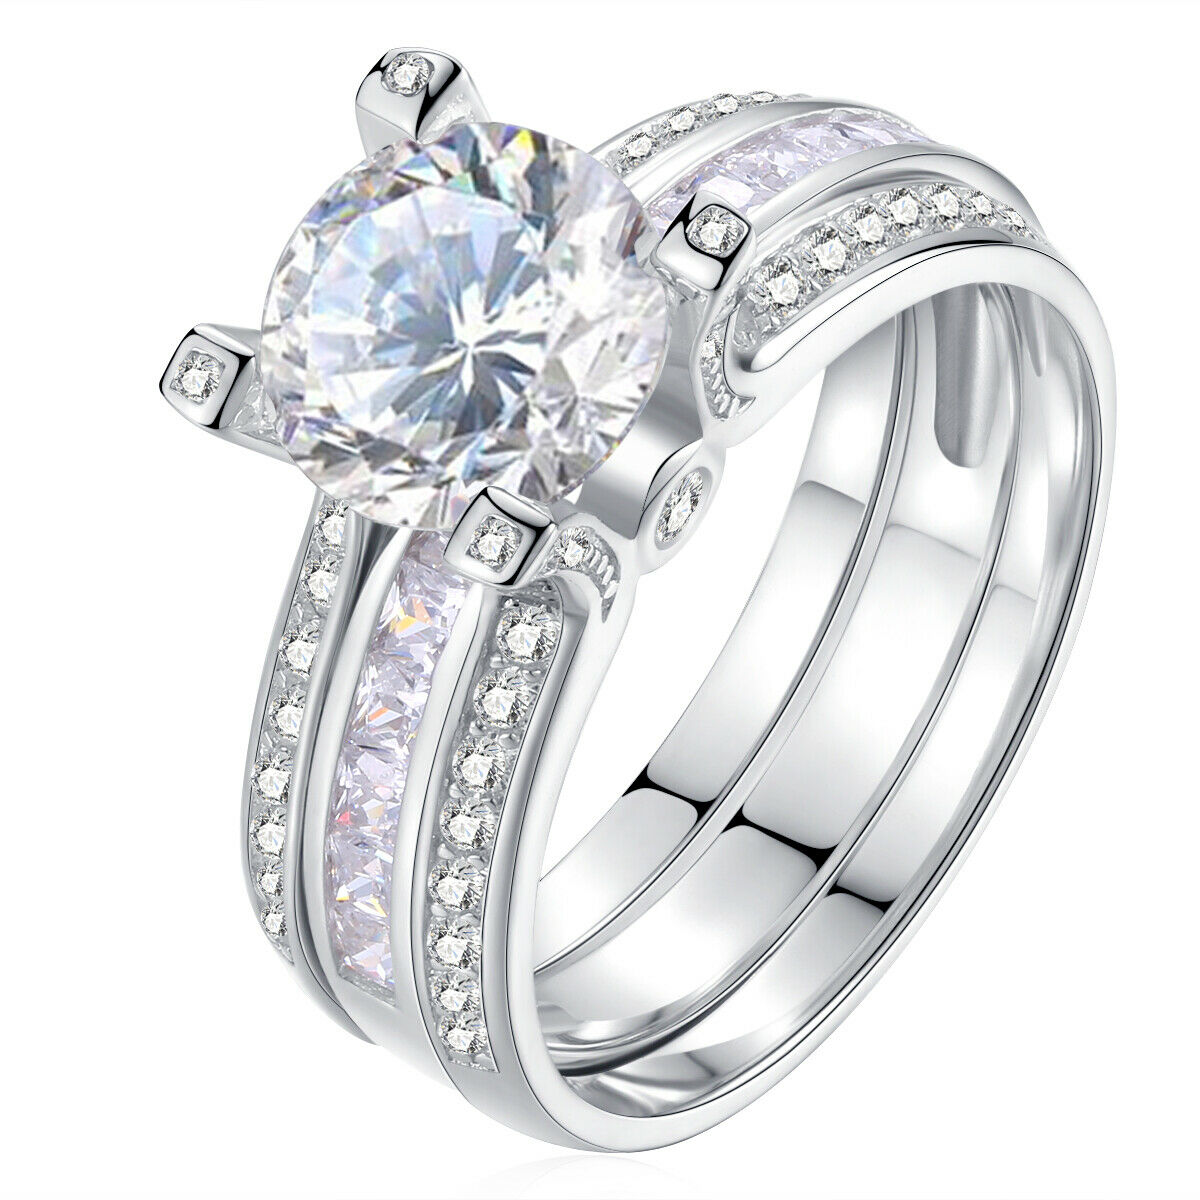 Wedding Band Engagement Ring Set For Women Round Cz White Gold Plated Size 8